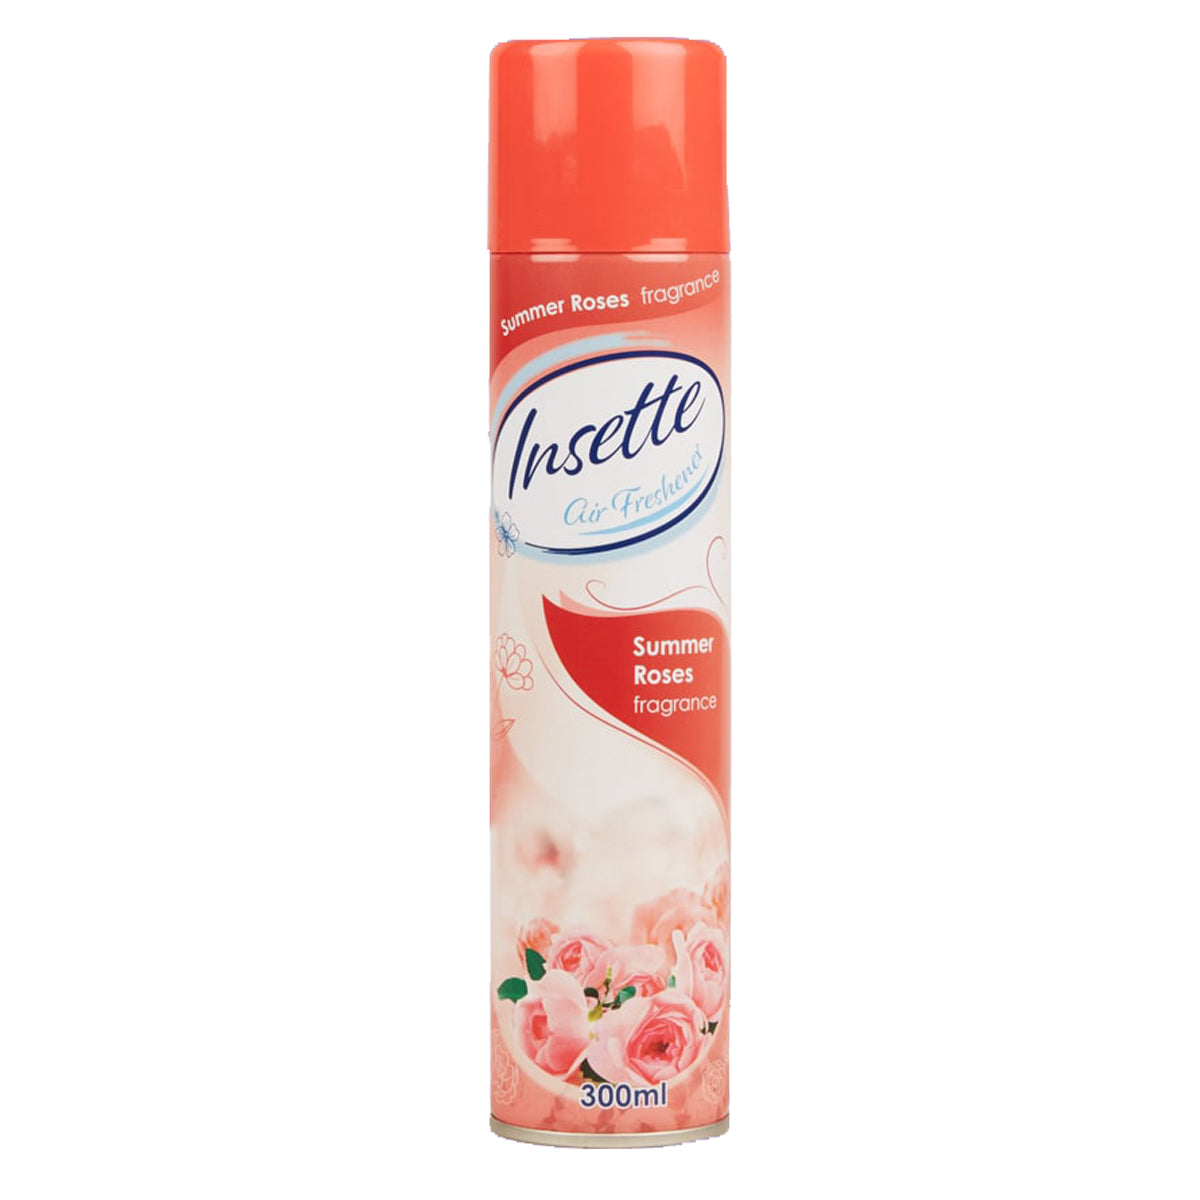 An Insette - Summer Roses Air Freshener Spray - 350ml bottle with roses on a white background.